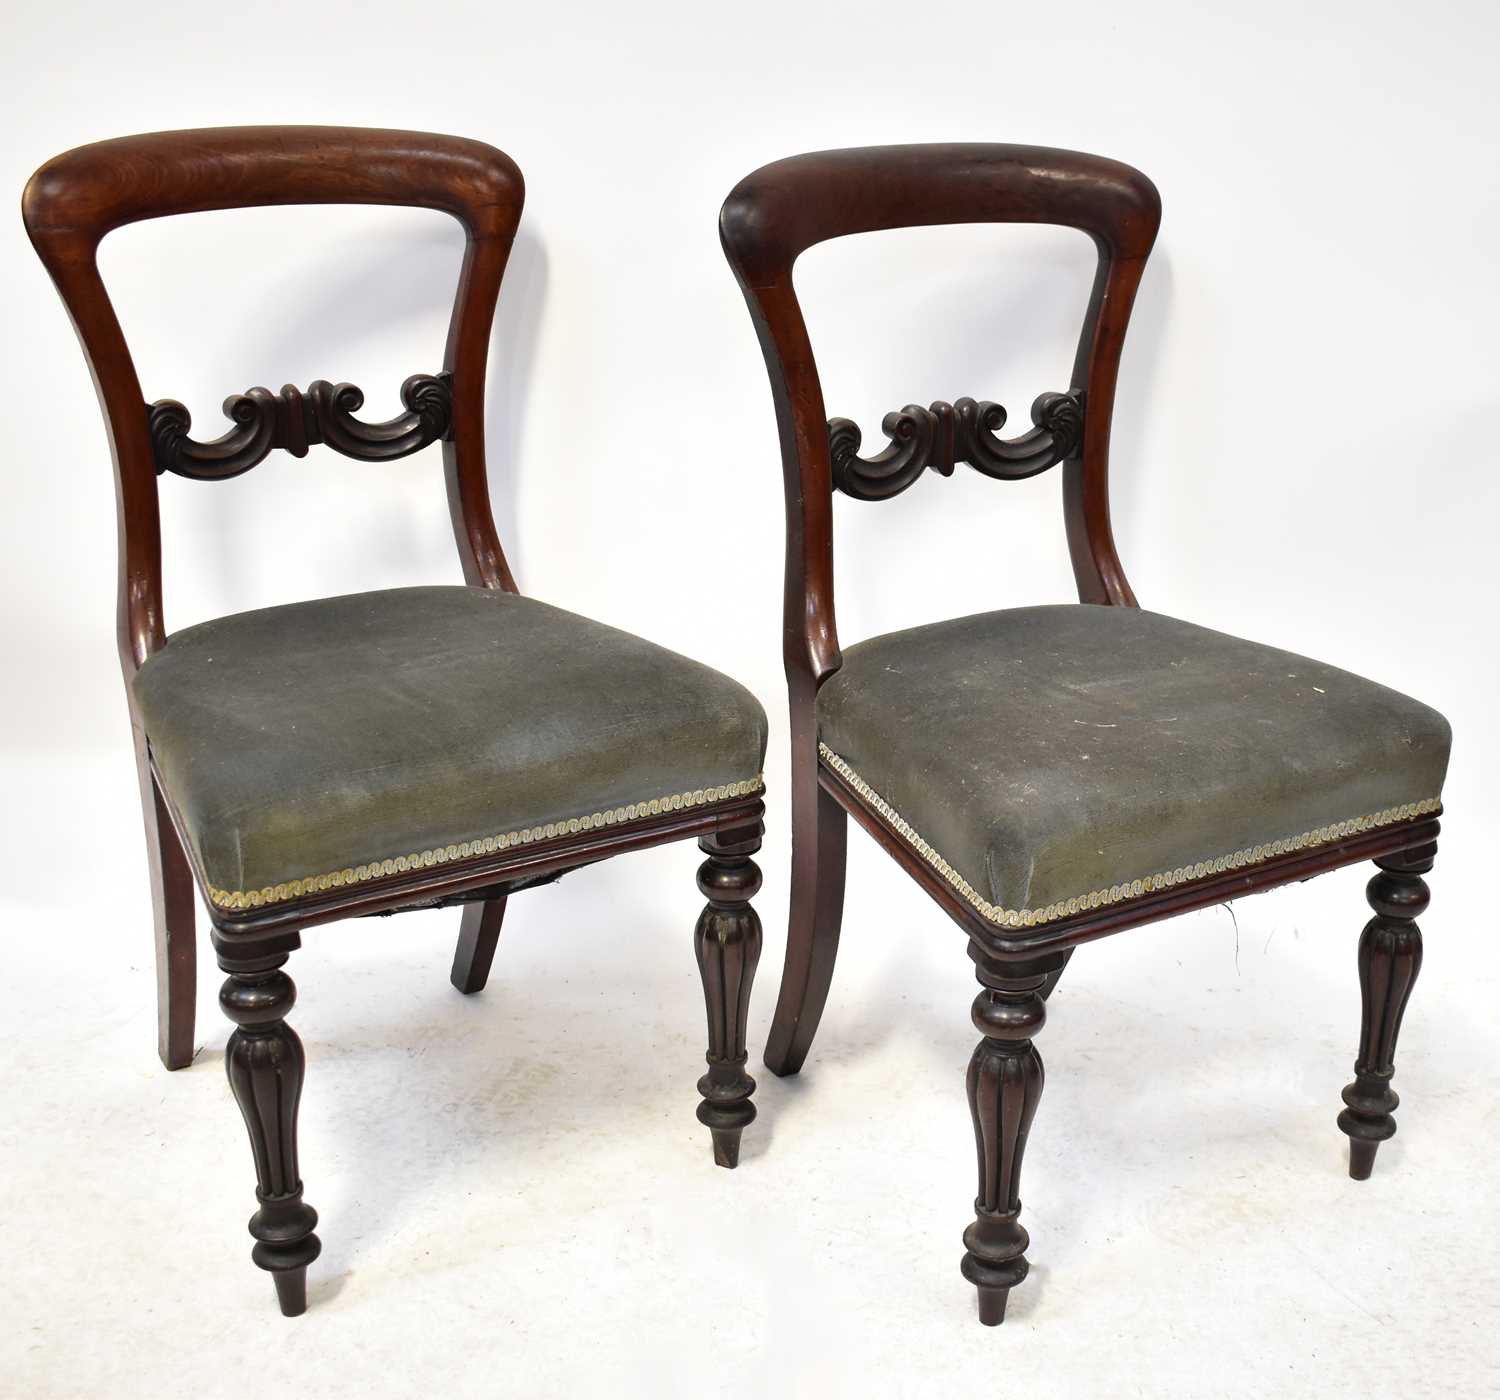 Four Regency mahogany bar-back dining chairs with blue velour upholstered seats, on reeded legs (4). - Image 2 of 2